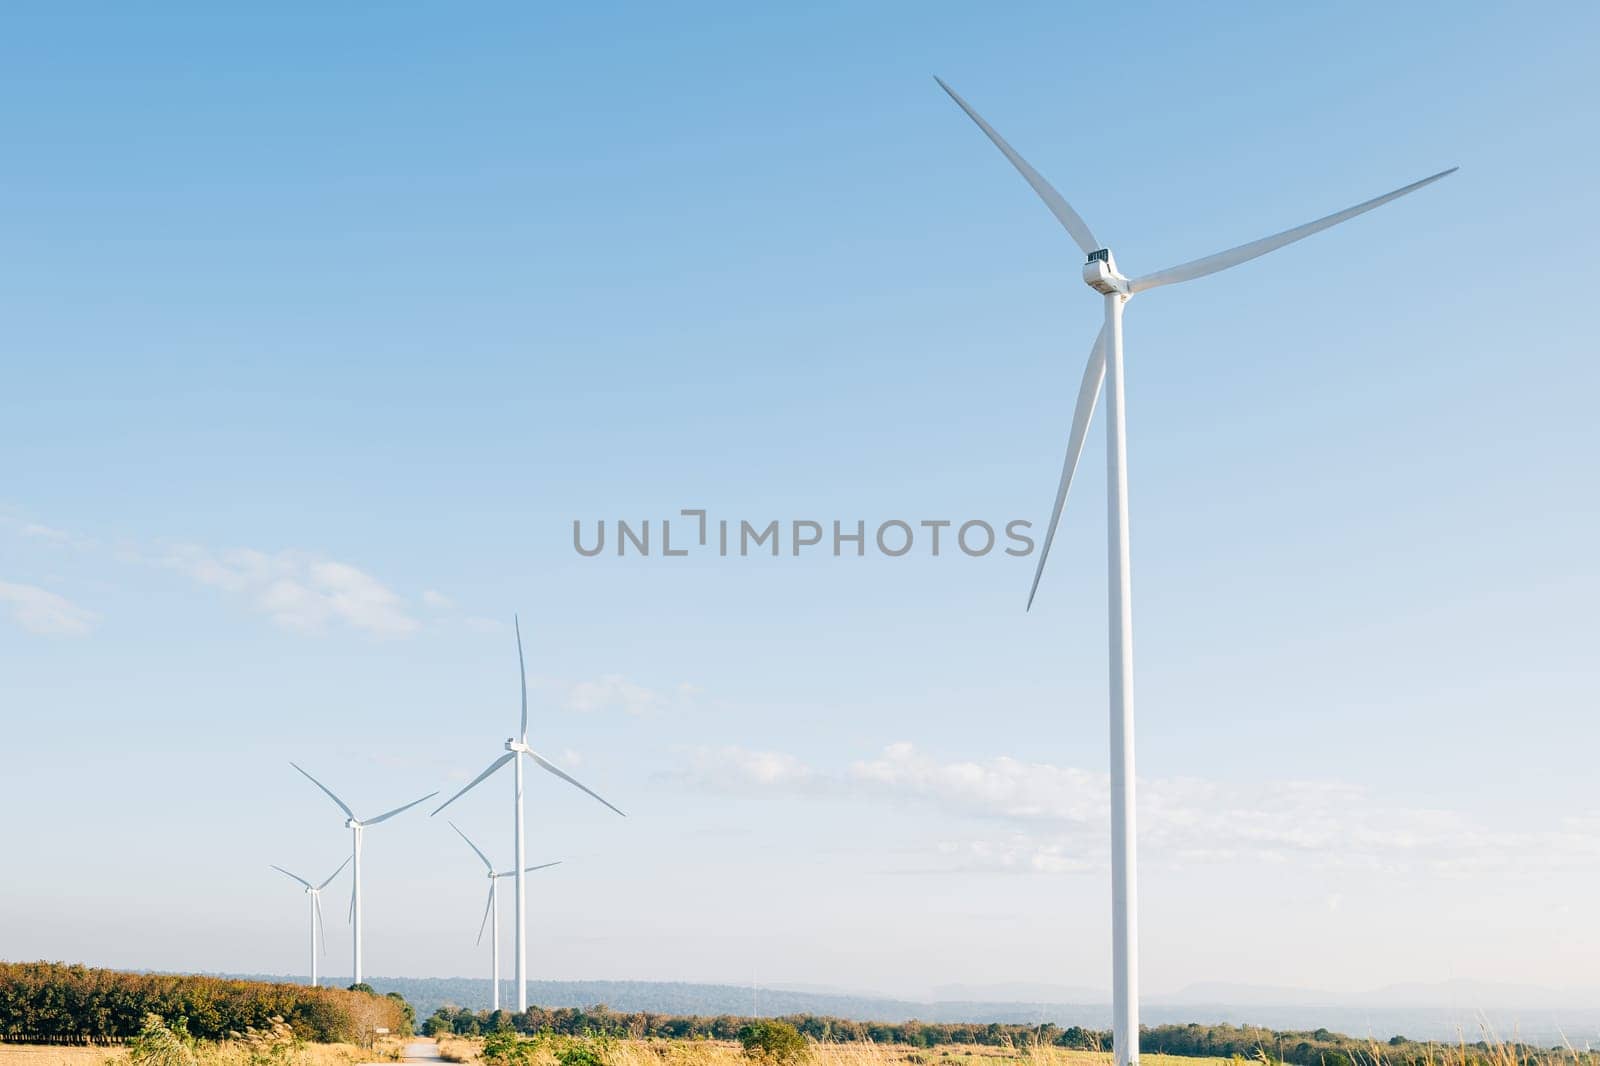 Nature meets technology, turbines on a mountain farm harness wind power for clean electricity. A modern windmill industry supporting sustainable development.